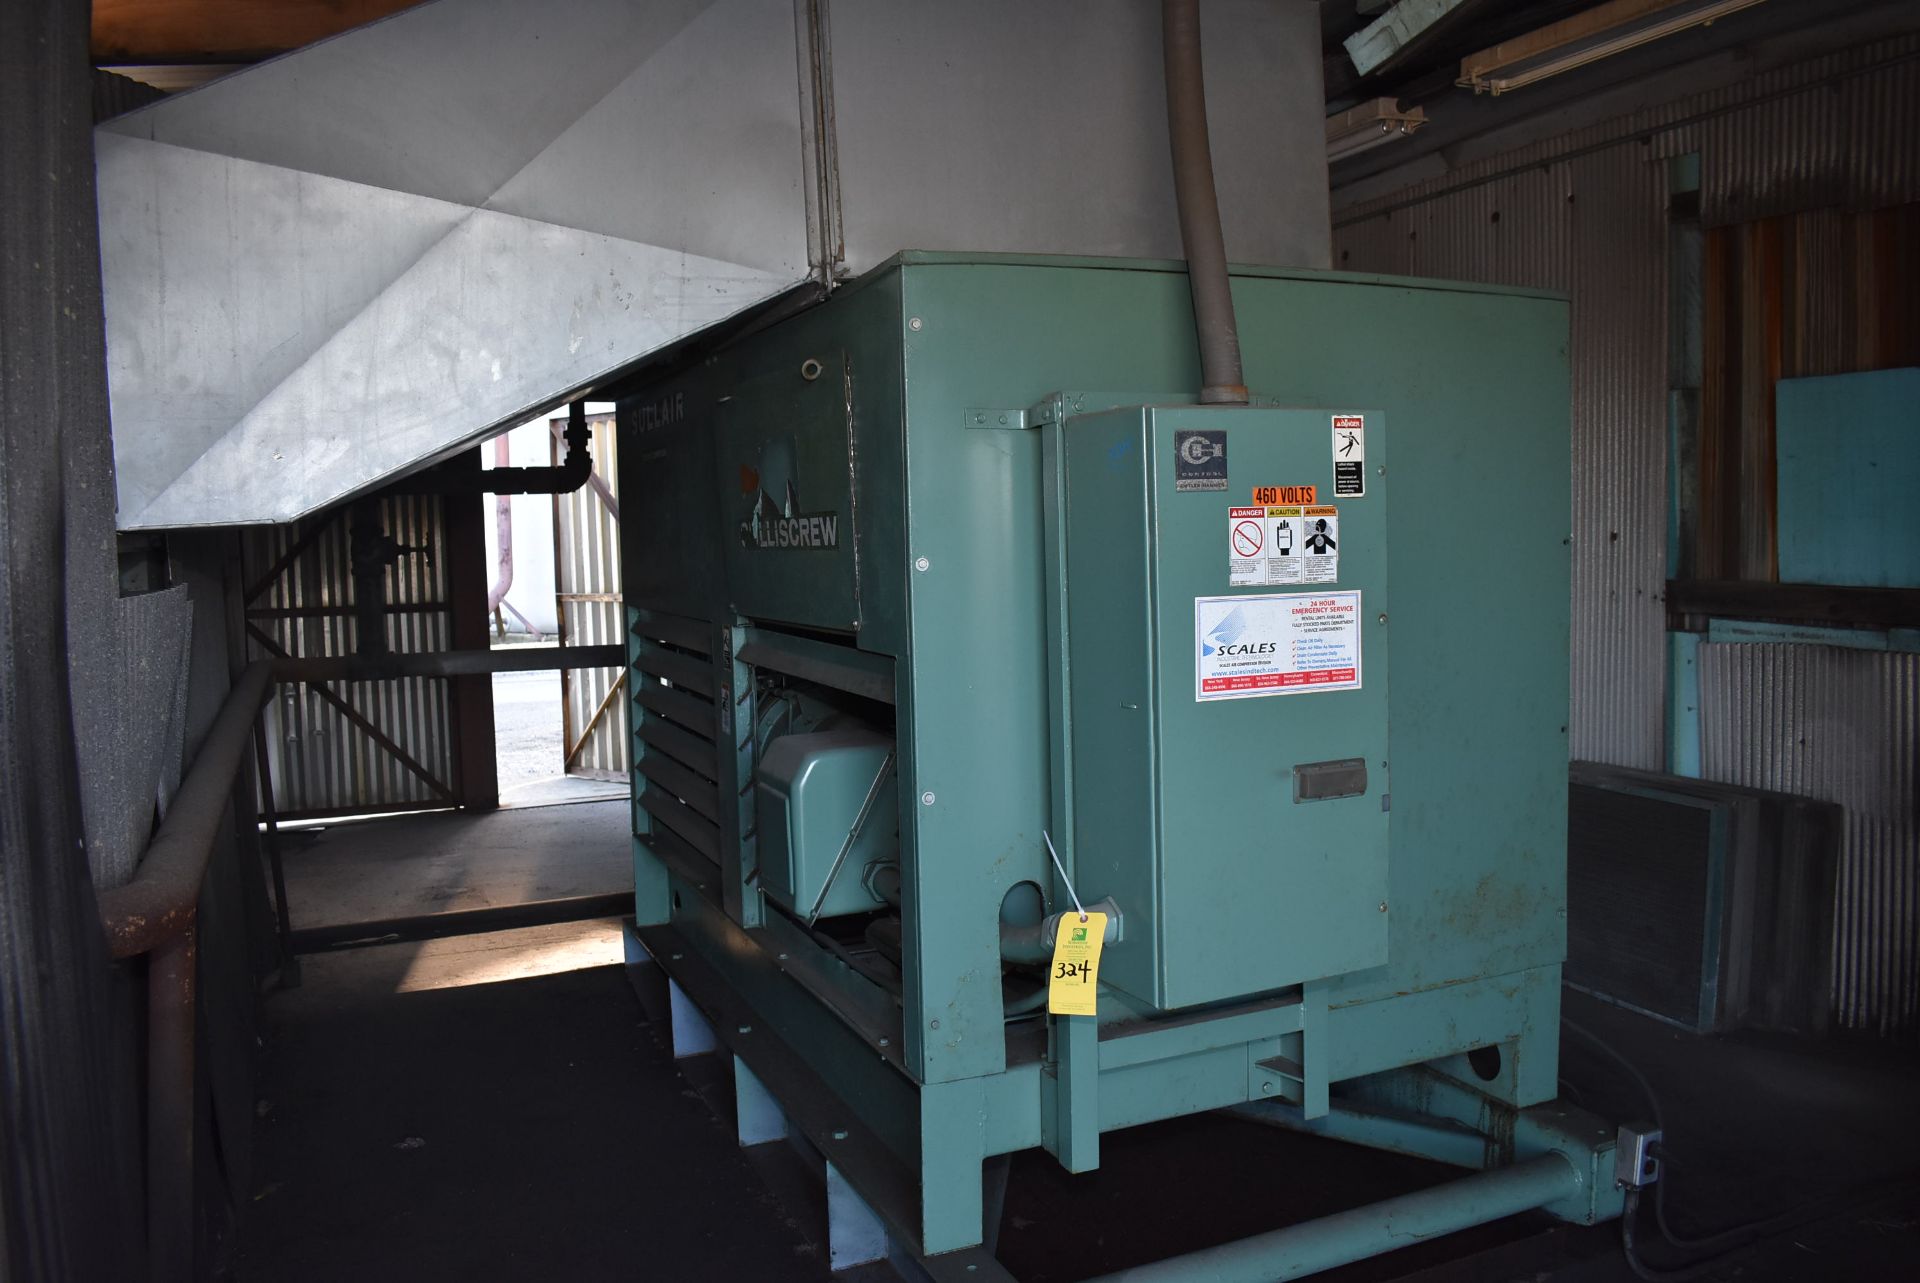 Sullair Sulliscrew Model #20-125L Rotary Screw Air Compressor, SN 03-55186 (4524 Hrs. Indicated) - Image 2 of 3